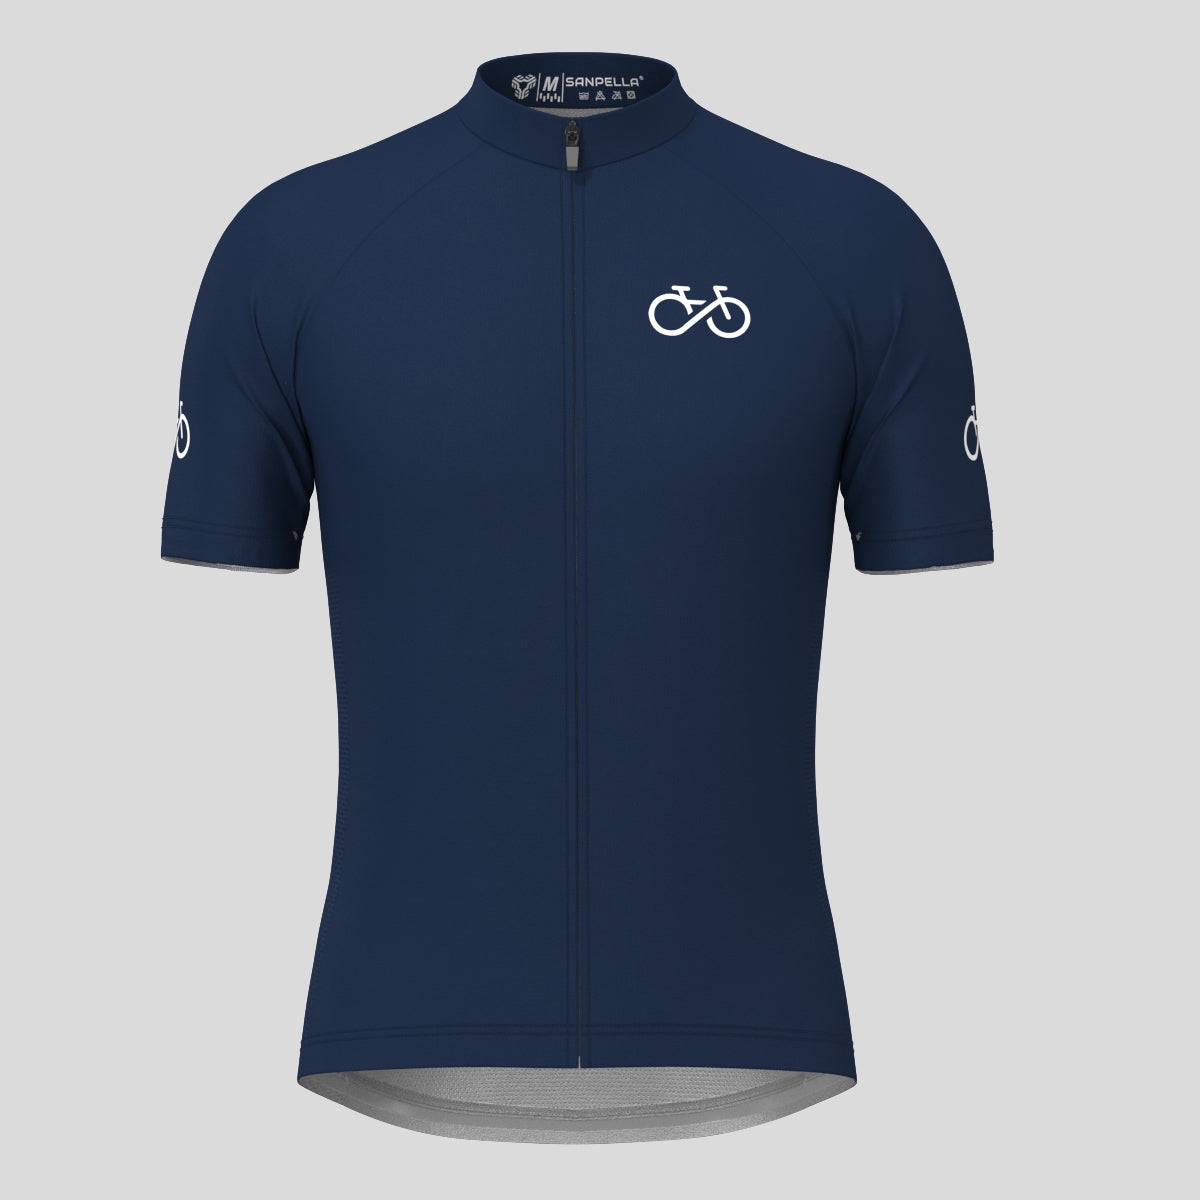 Ride Forever Men's Cycling Jersey -Navy